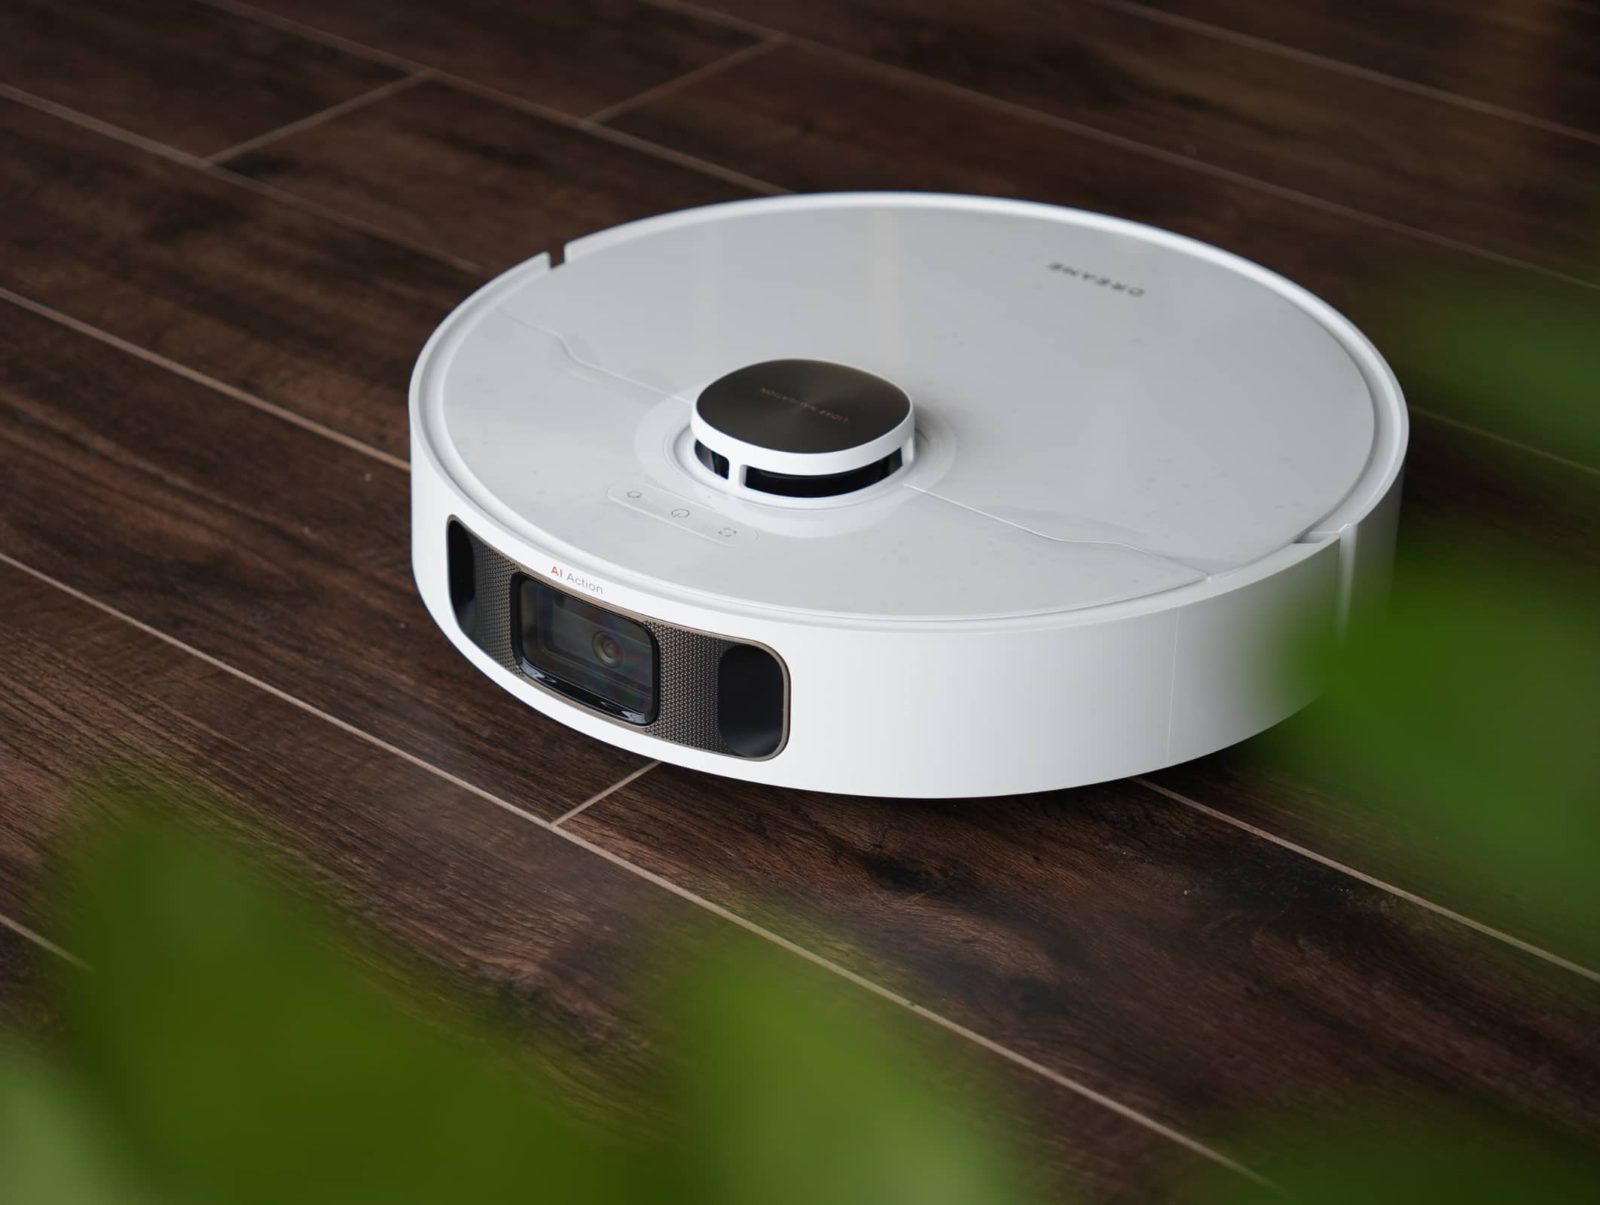 The Dreame L10s Ultra vacuum and floor mopping robot will be